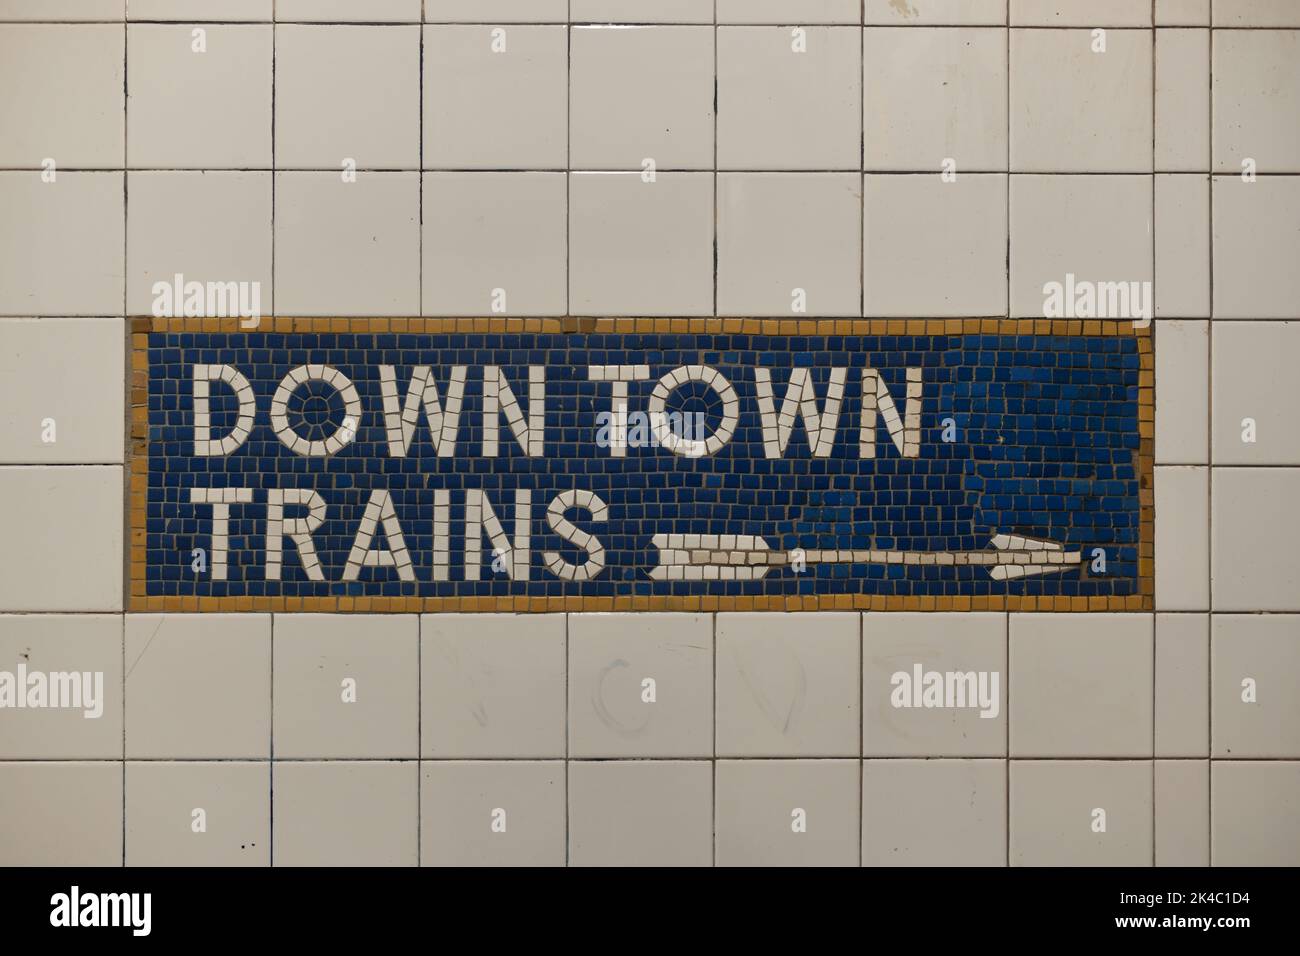 Tiled New York City subway train sign with arrow pointing direction. Stock Photo